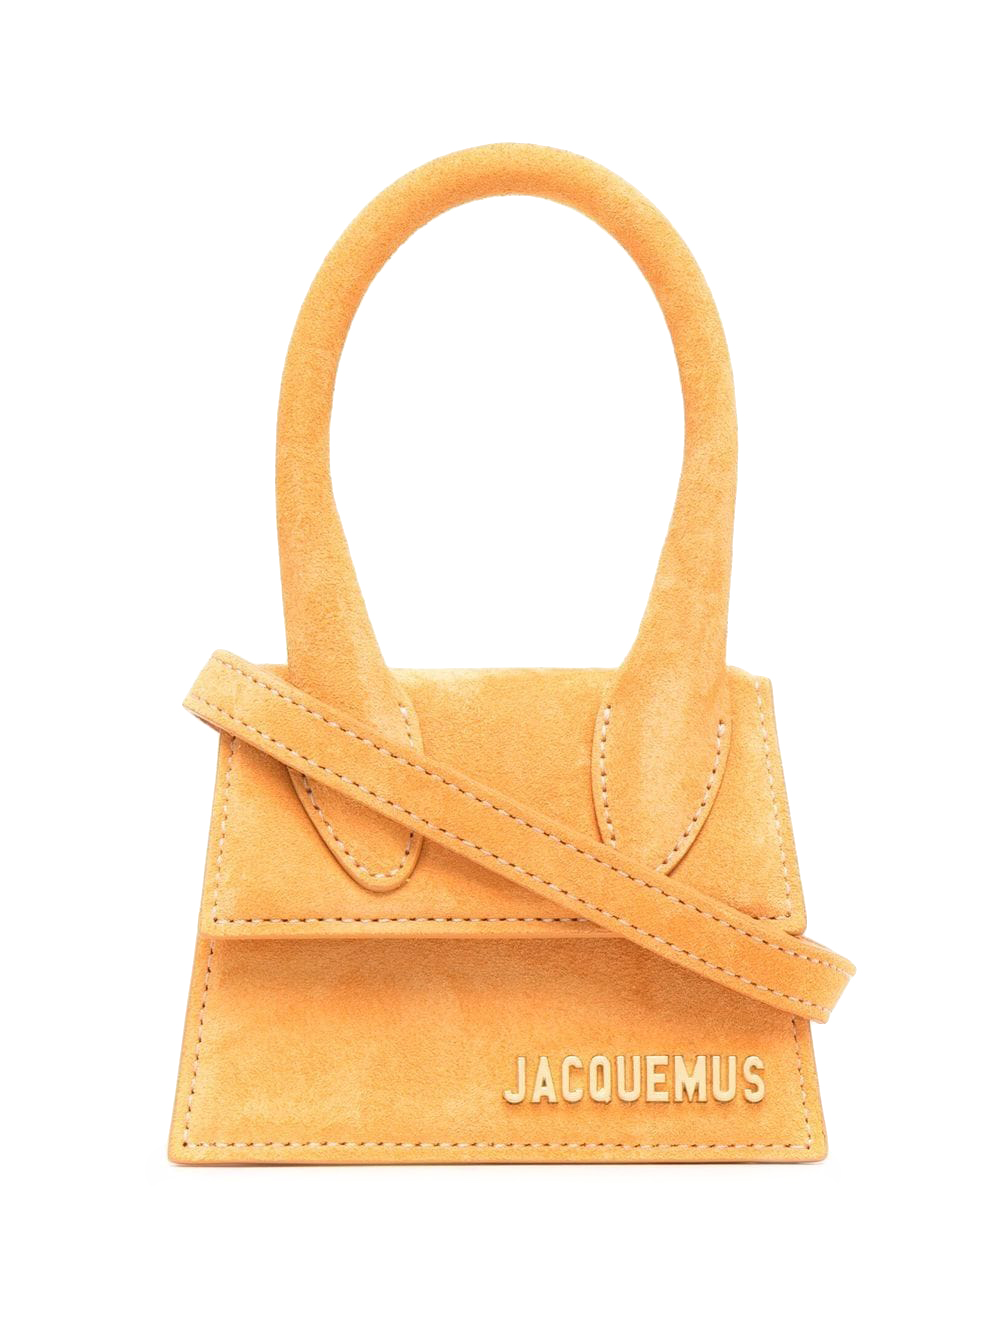 Buy Other Brands Jacquemus Accessories - StockX